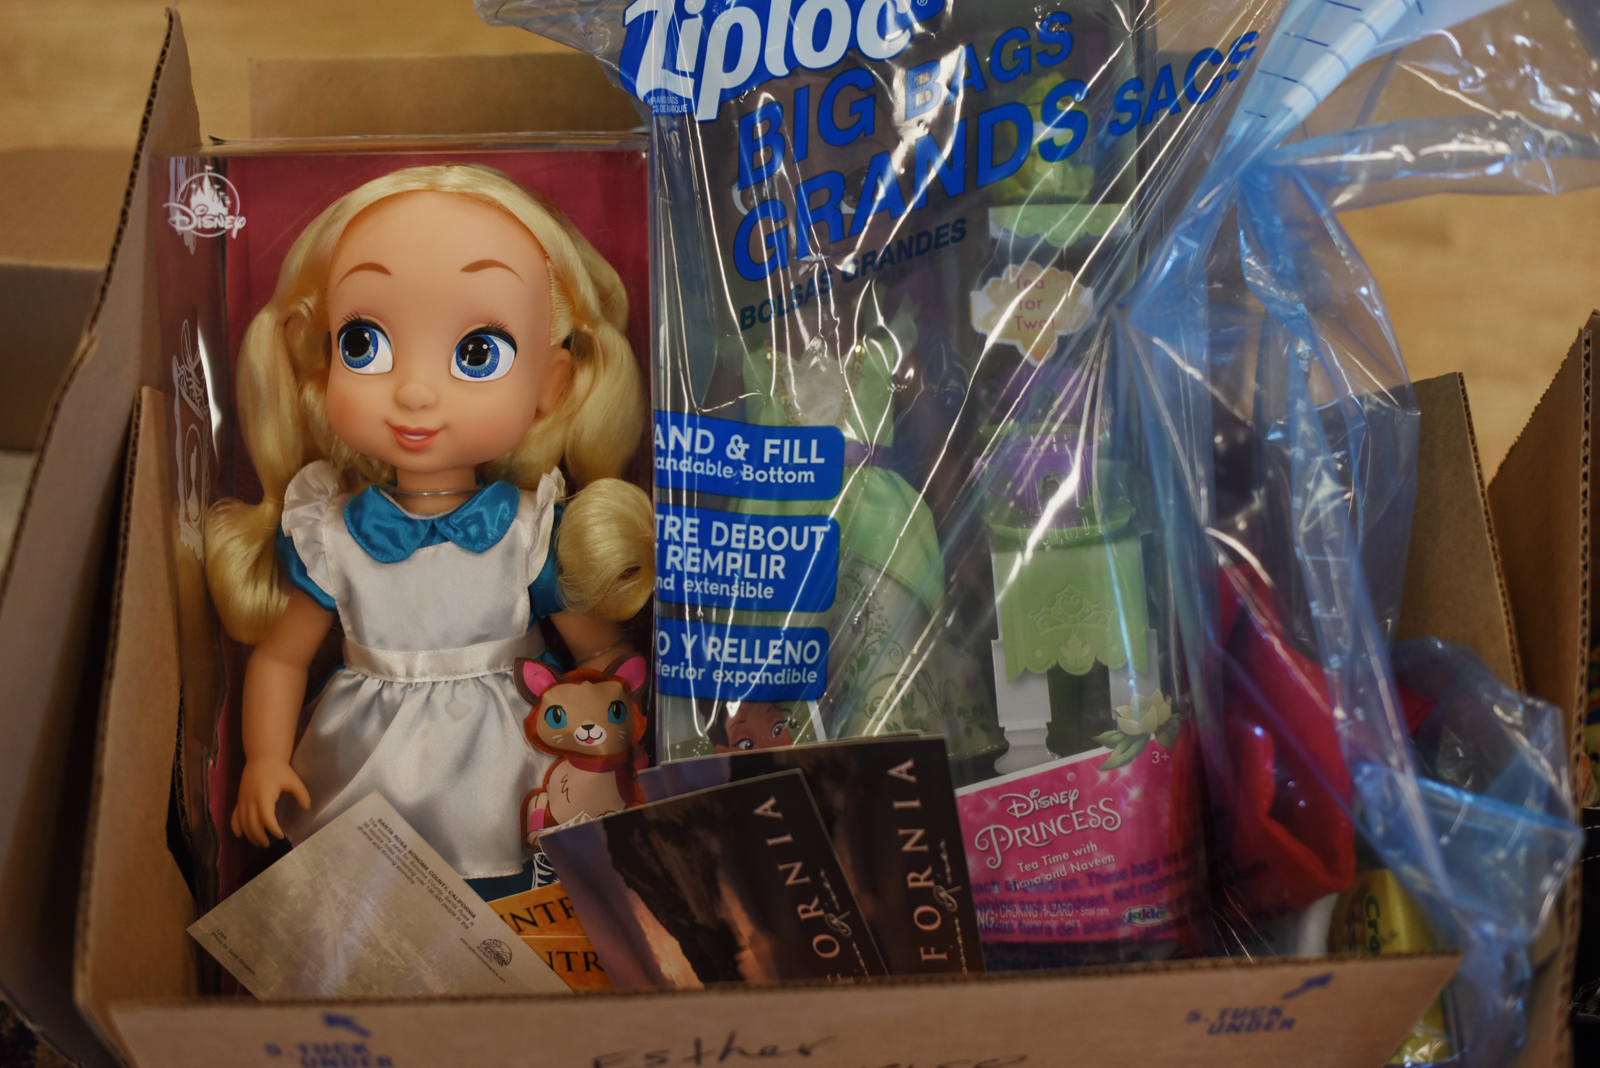 Donation box containing children's toys.